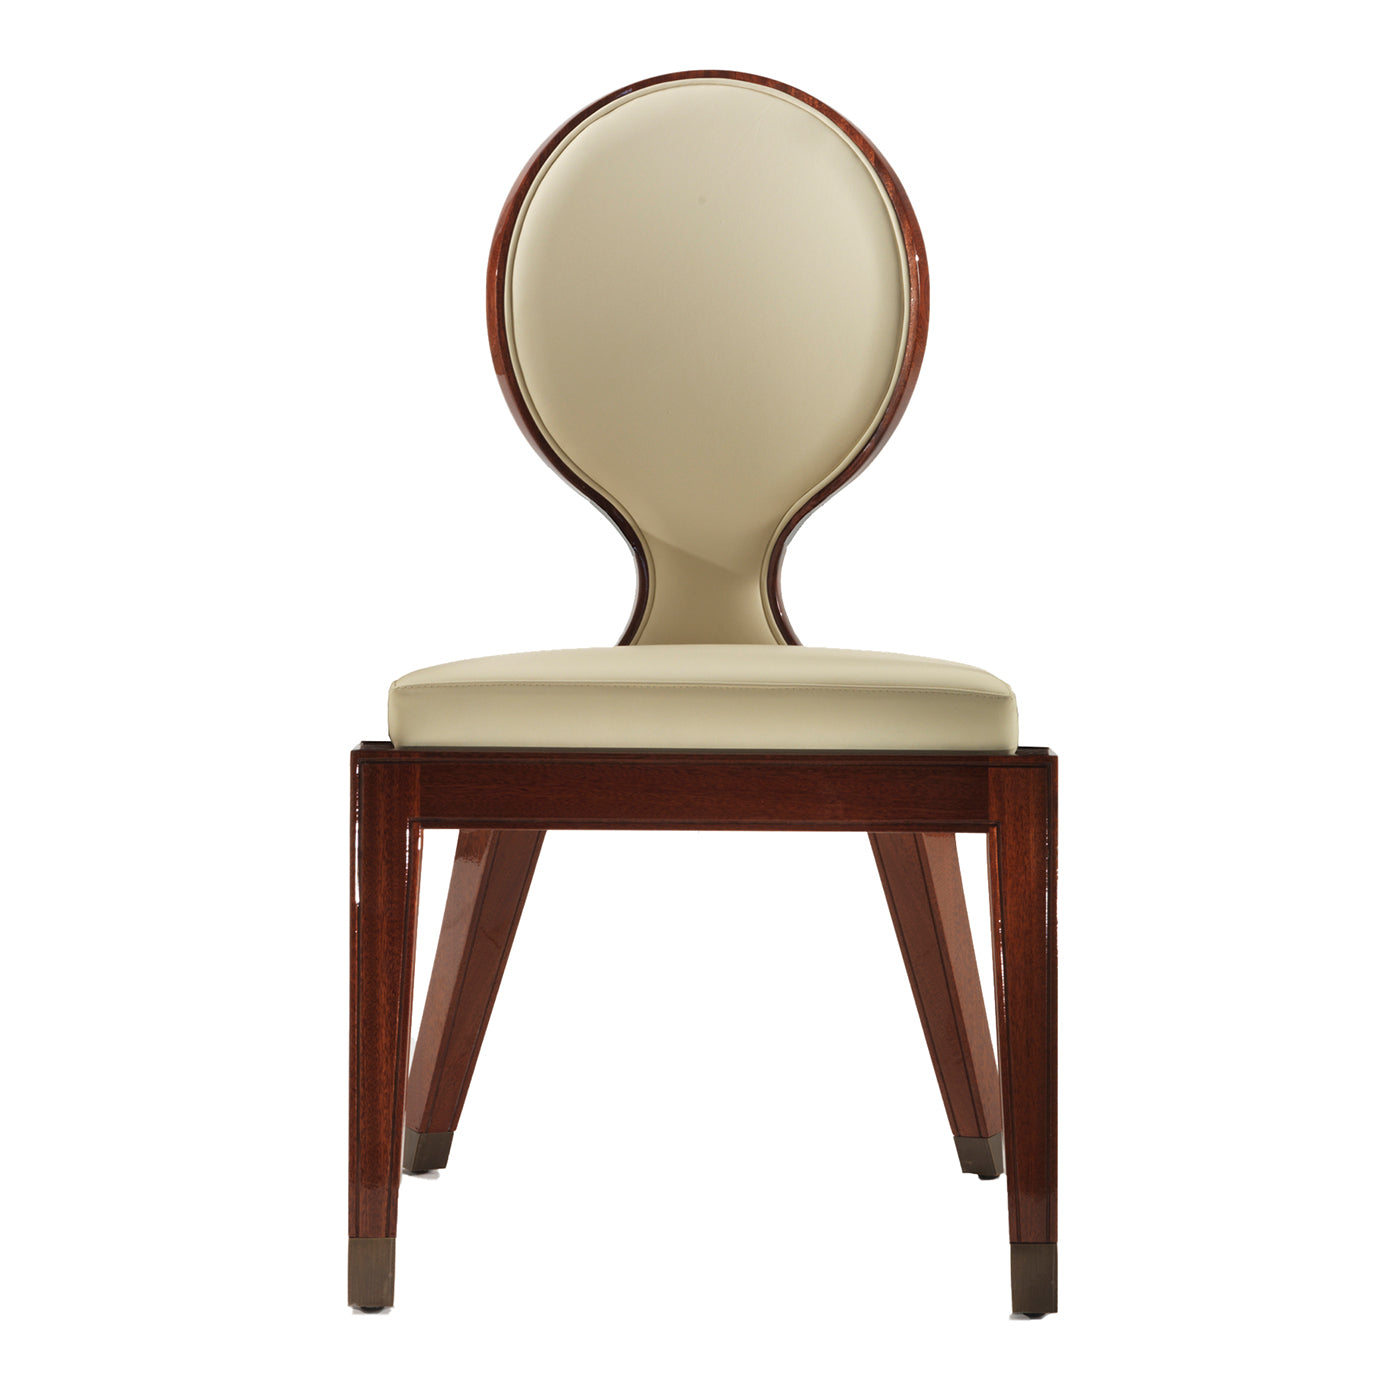 Red Sun Dining Chair by Archer Humphryes Architects - Alternative view 2